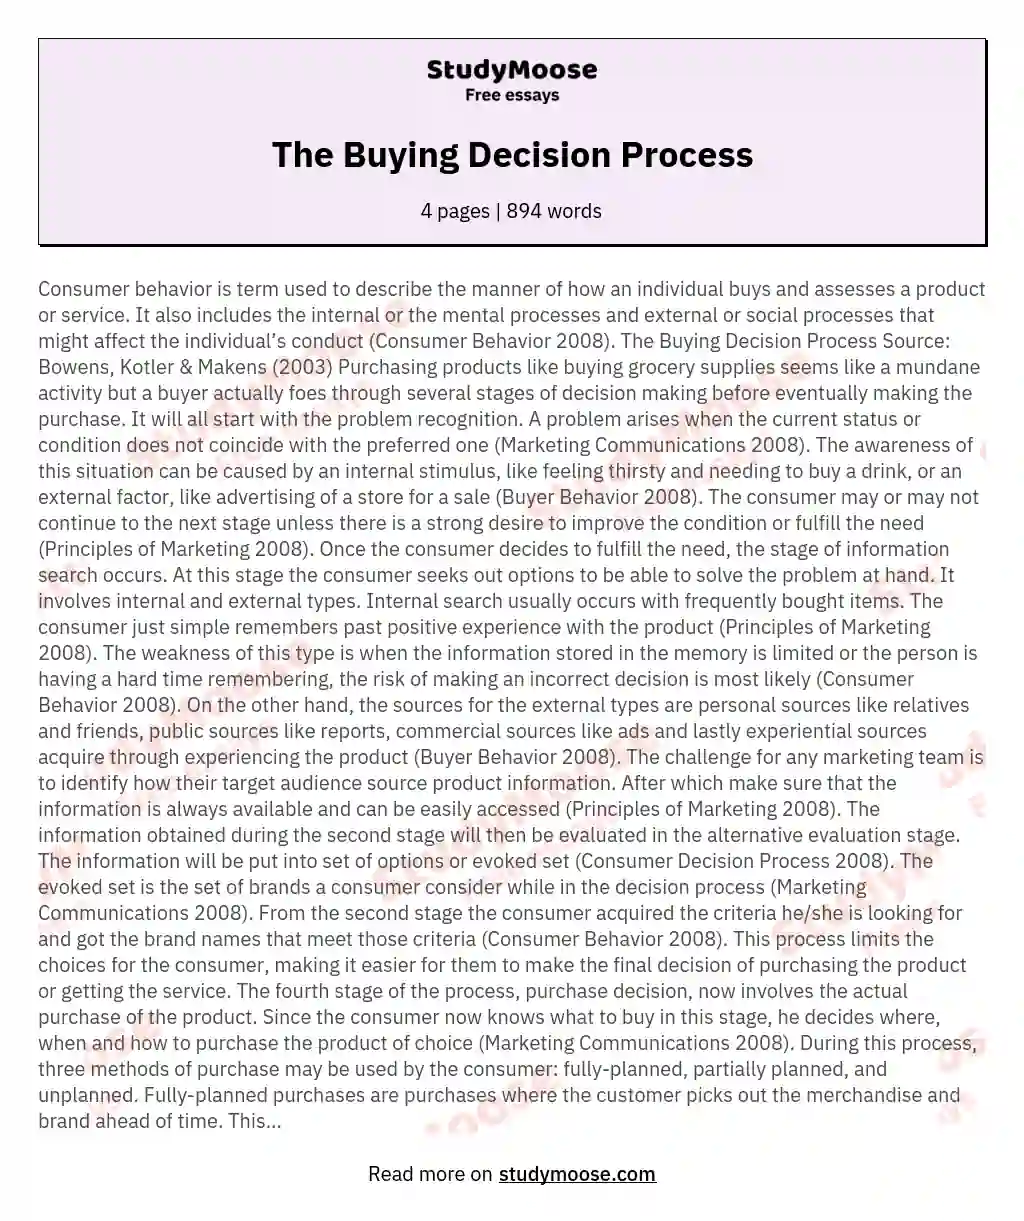 The Buying Decision Process essay